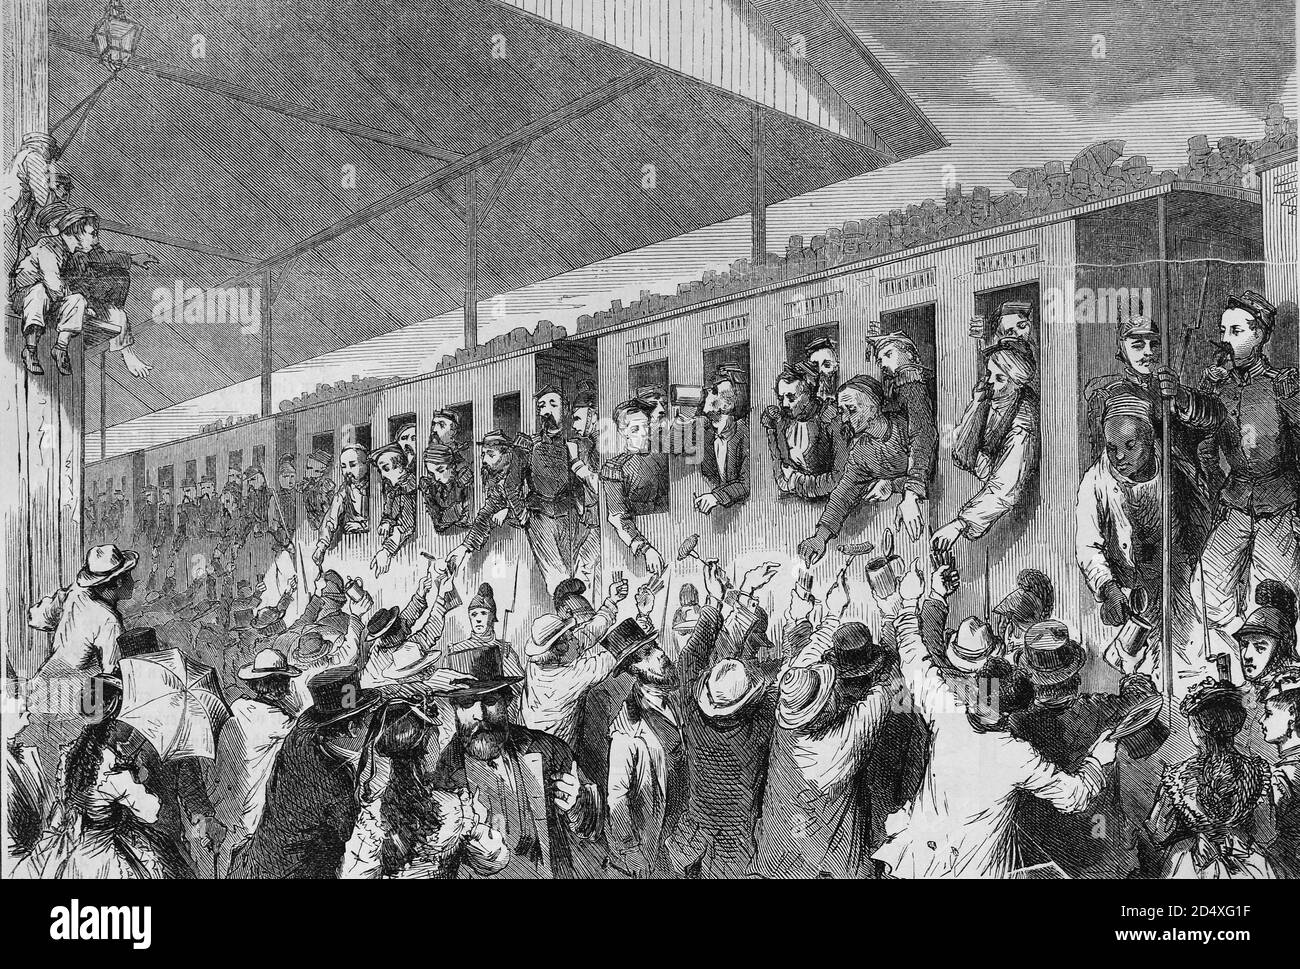 French prisoners of war at the railway station in Munich, illustrated war history, German - French war 1870-1871 Stock Photo